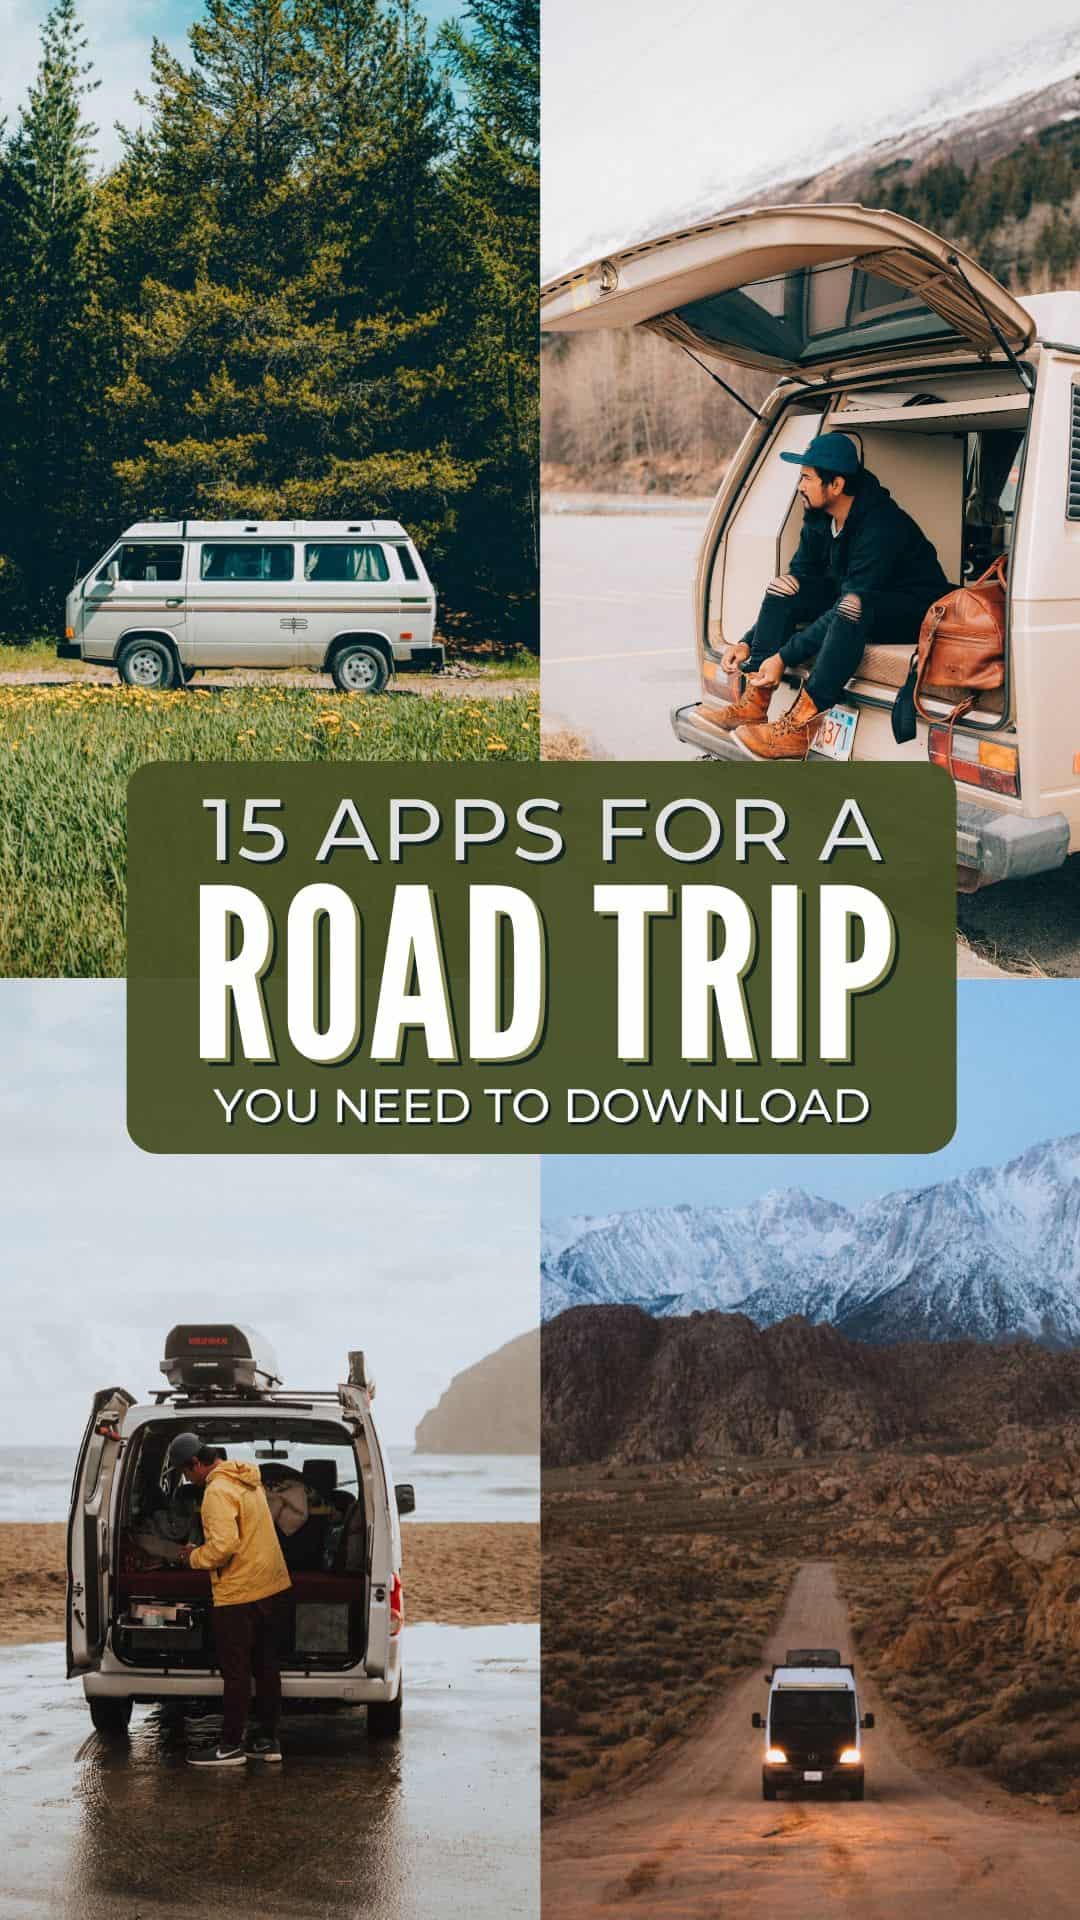 Searching for useful road trip planners to make your next trip a breeze? We're sharing our 15 favorite road trip apps and tools, that help us find everything from the cheapest gas prices to free campsites! Save this post for your next epic summer road trip adventure! #roadtrip #summer #camping #campsite #roadtripplanner #adventure #USA #travel #photography